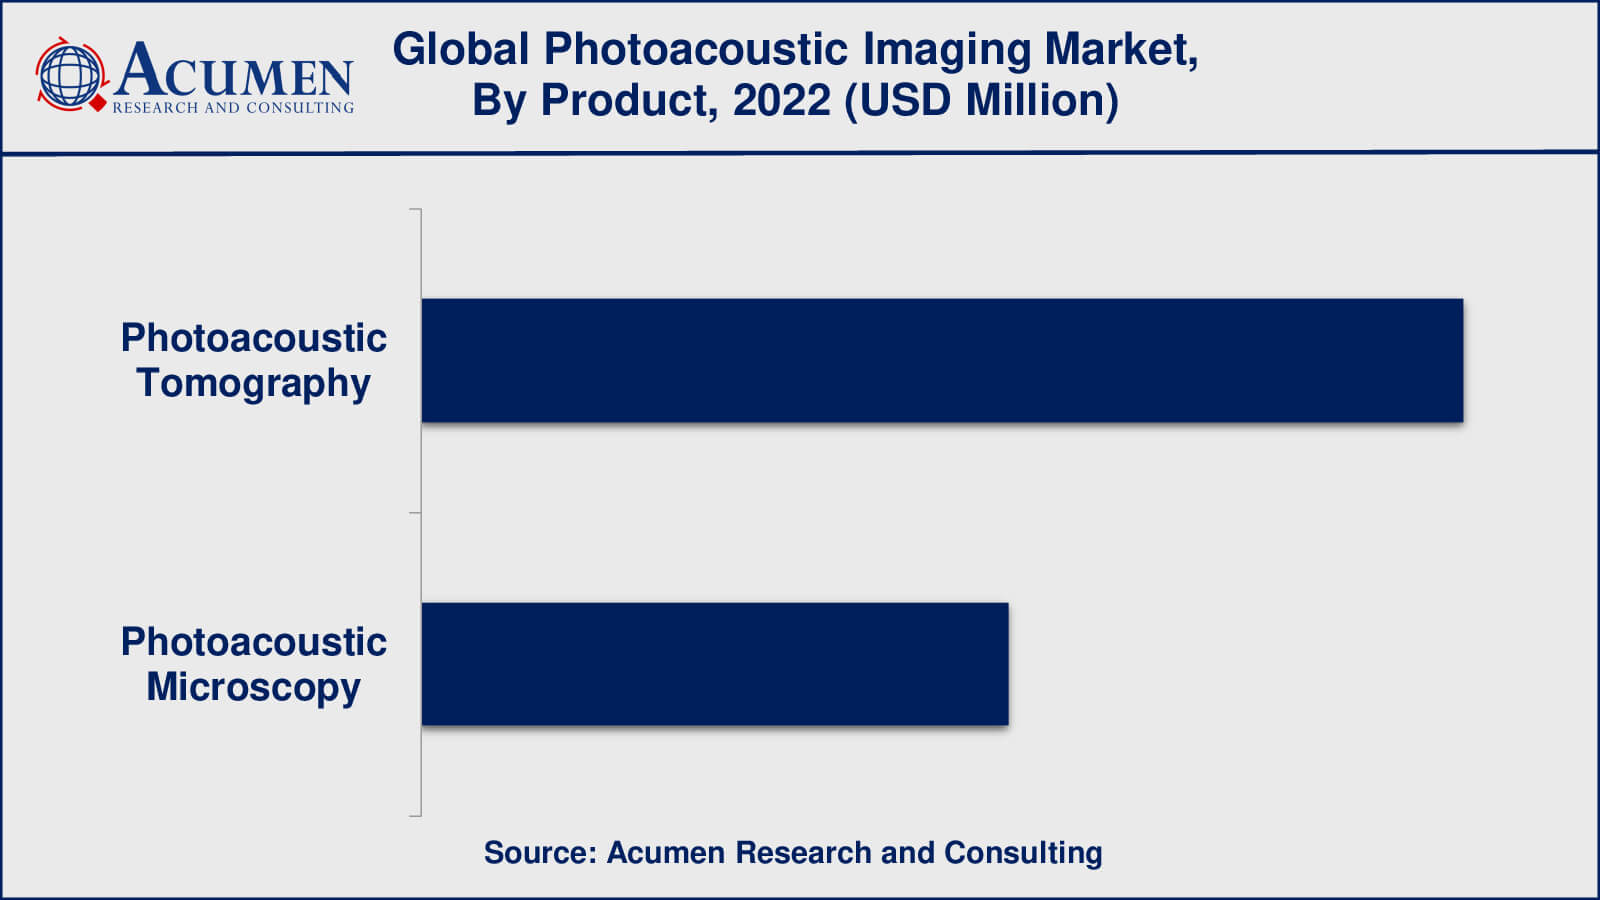 Photoacoustic Imaging Market Drivers